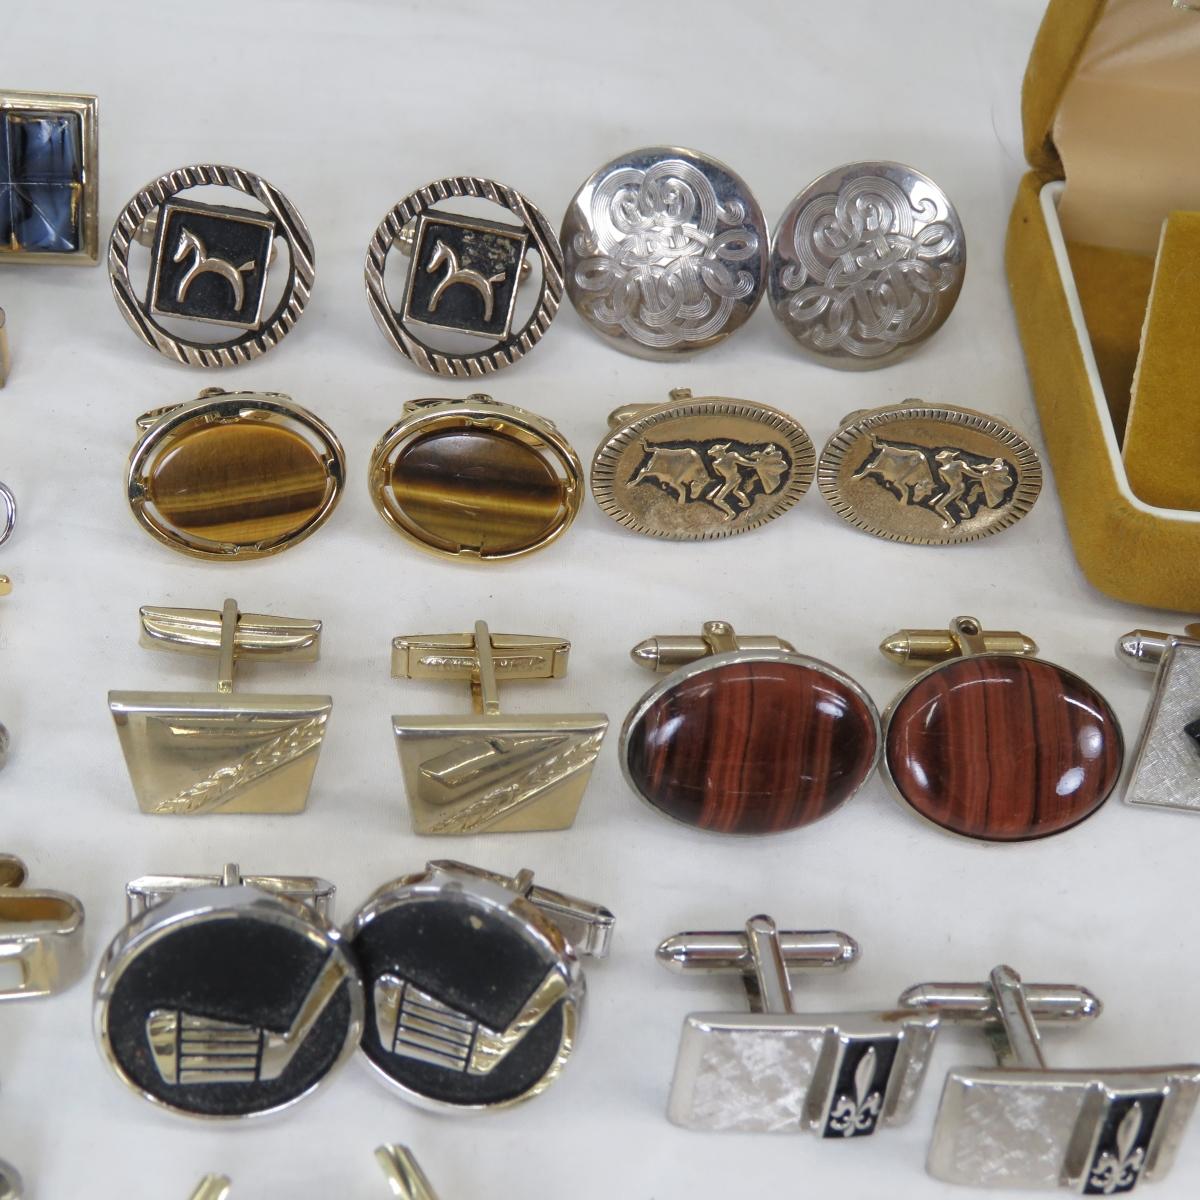 Rings, Cufflinks, Tie Pins and Bars & More in Case